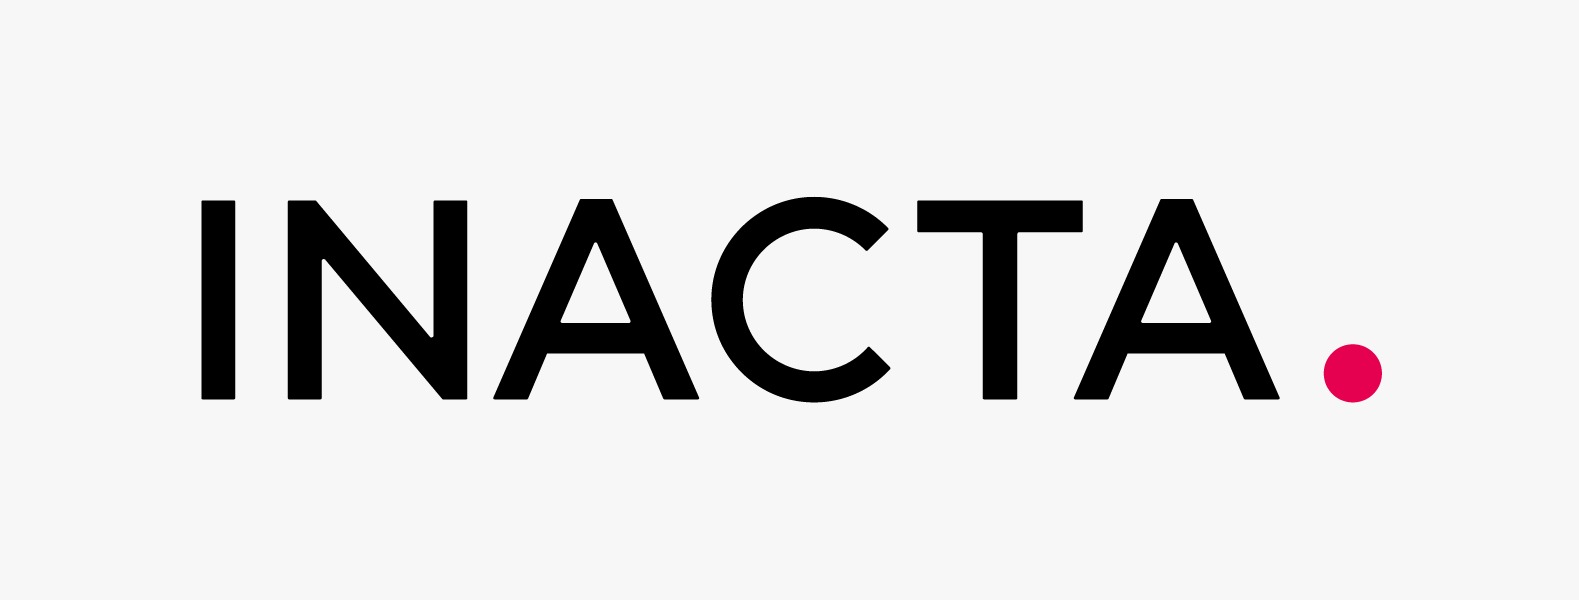 Alexander Bojer is appointed new CEO of Inacta AG as of January 2023